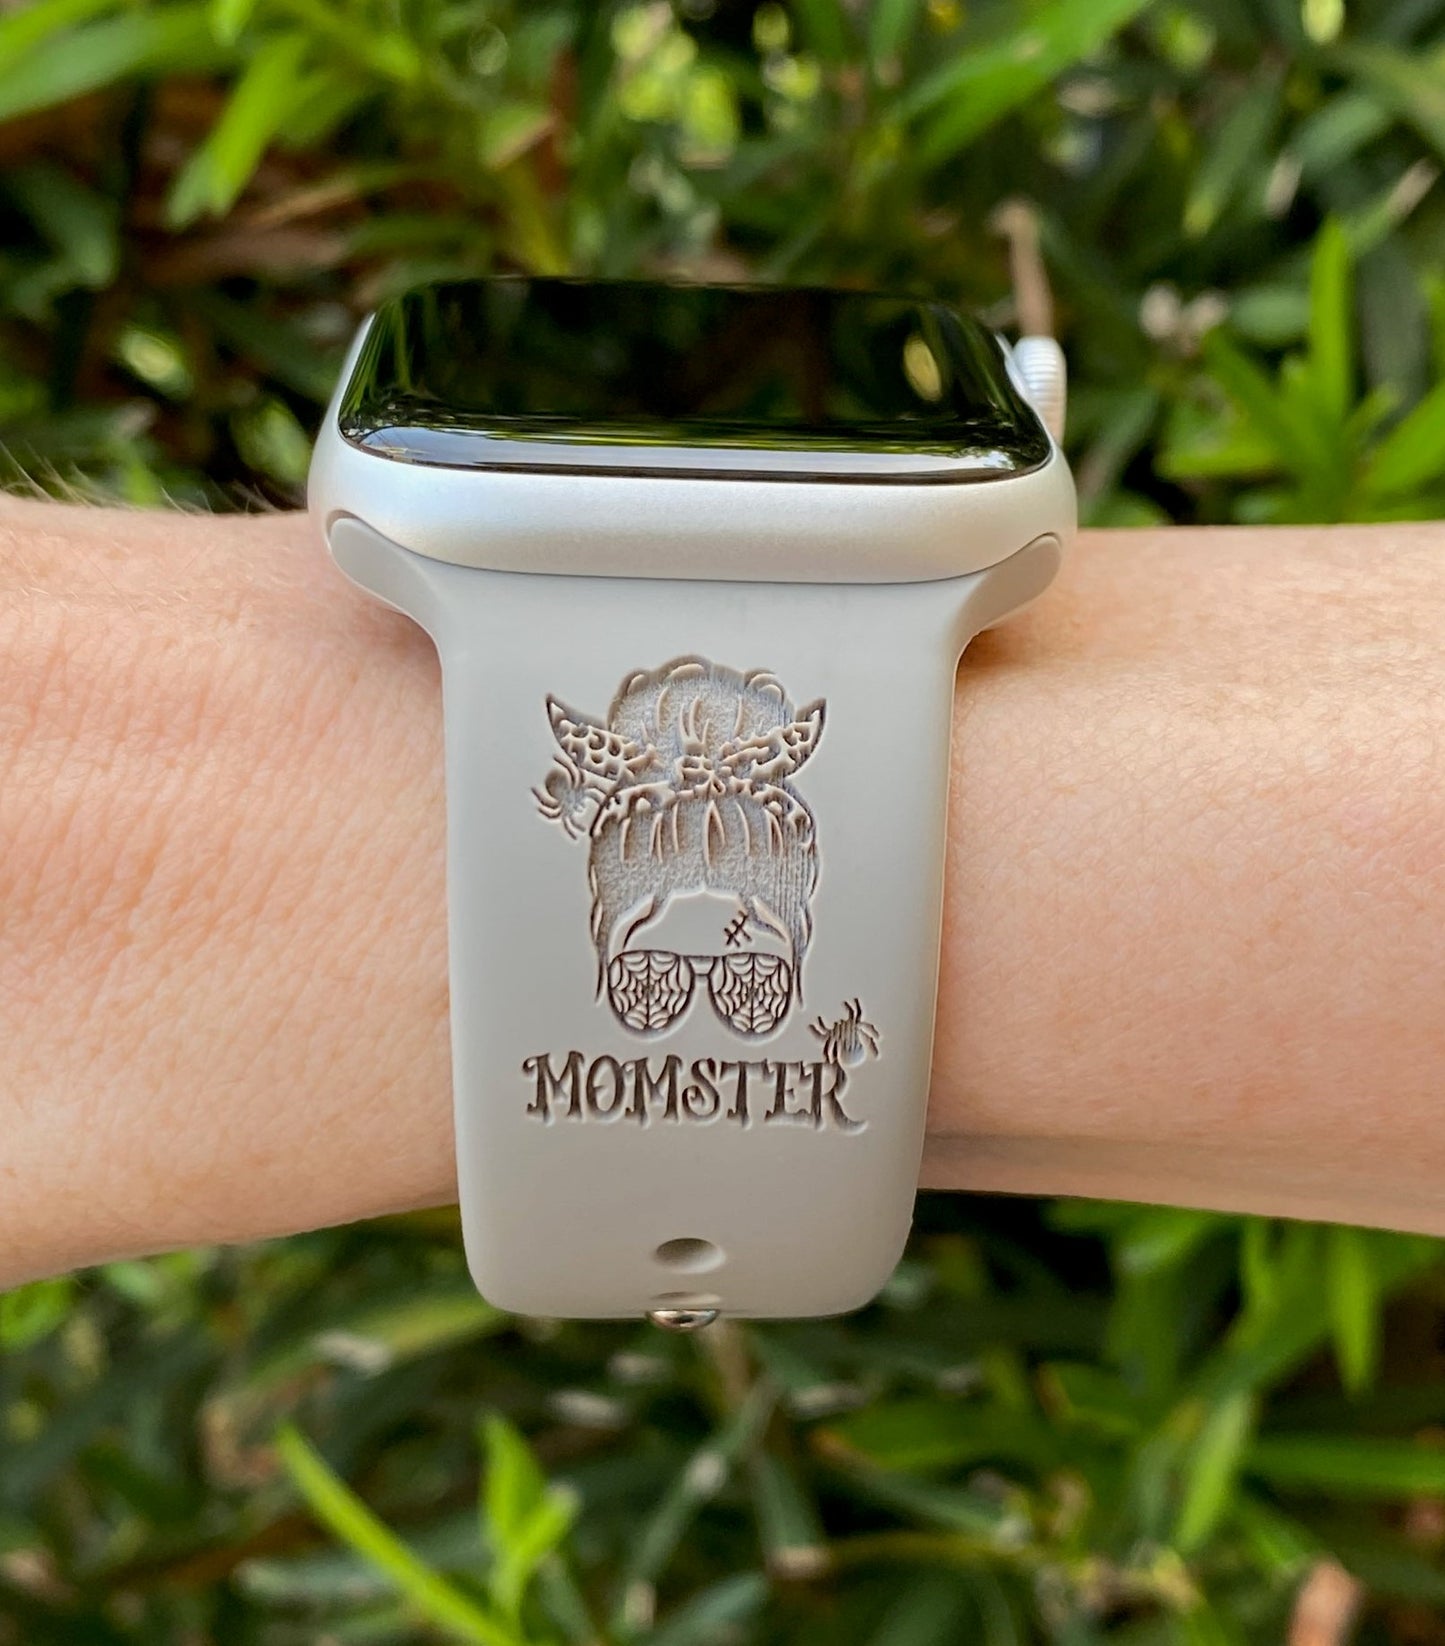 Momster Apple Watch Band